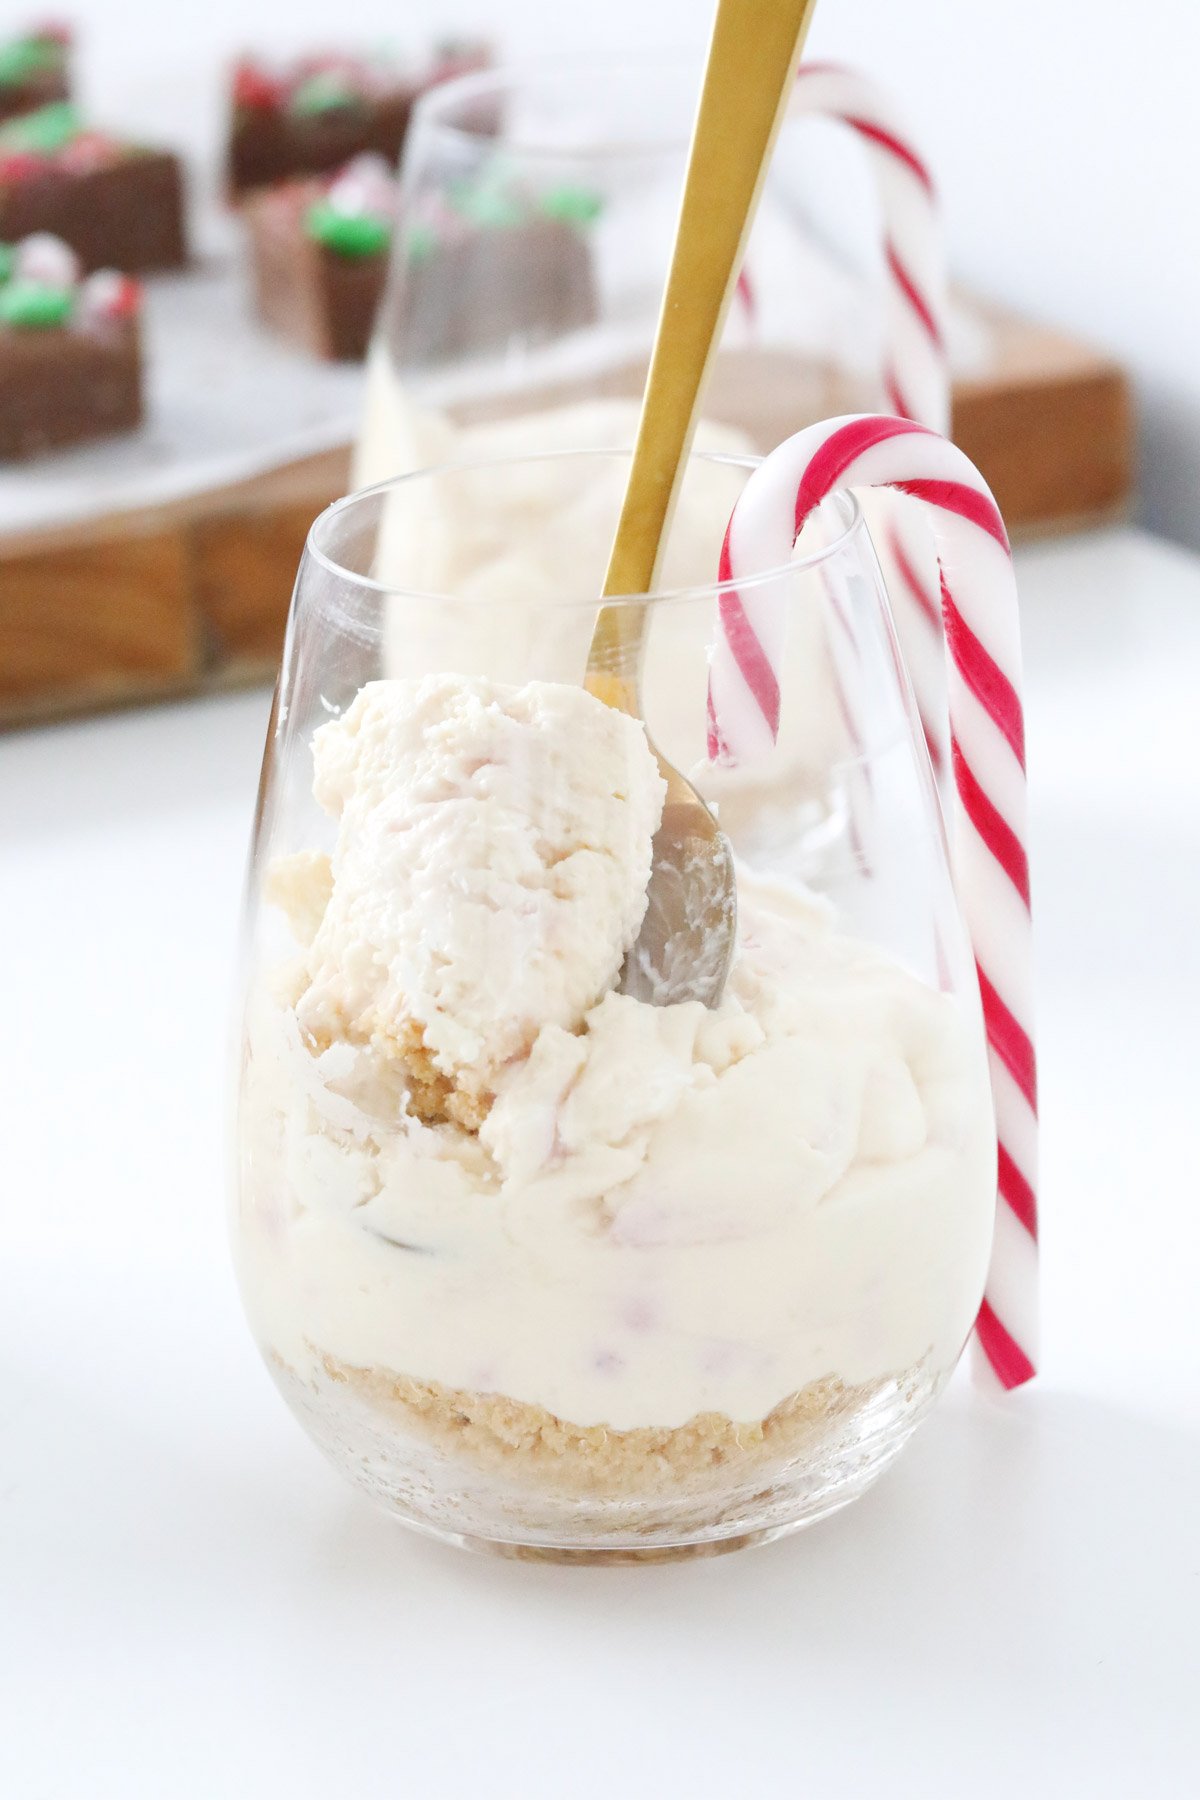 A close up of a stemless wine glass filled with a white cheesecake mixture, and a candy cane placed over the rm of the glass.